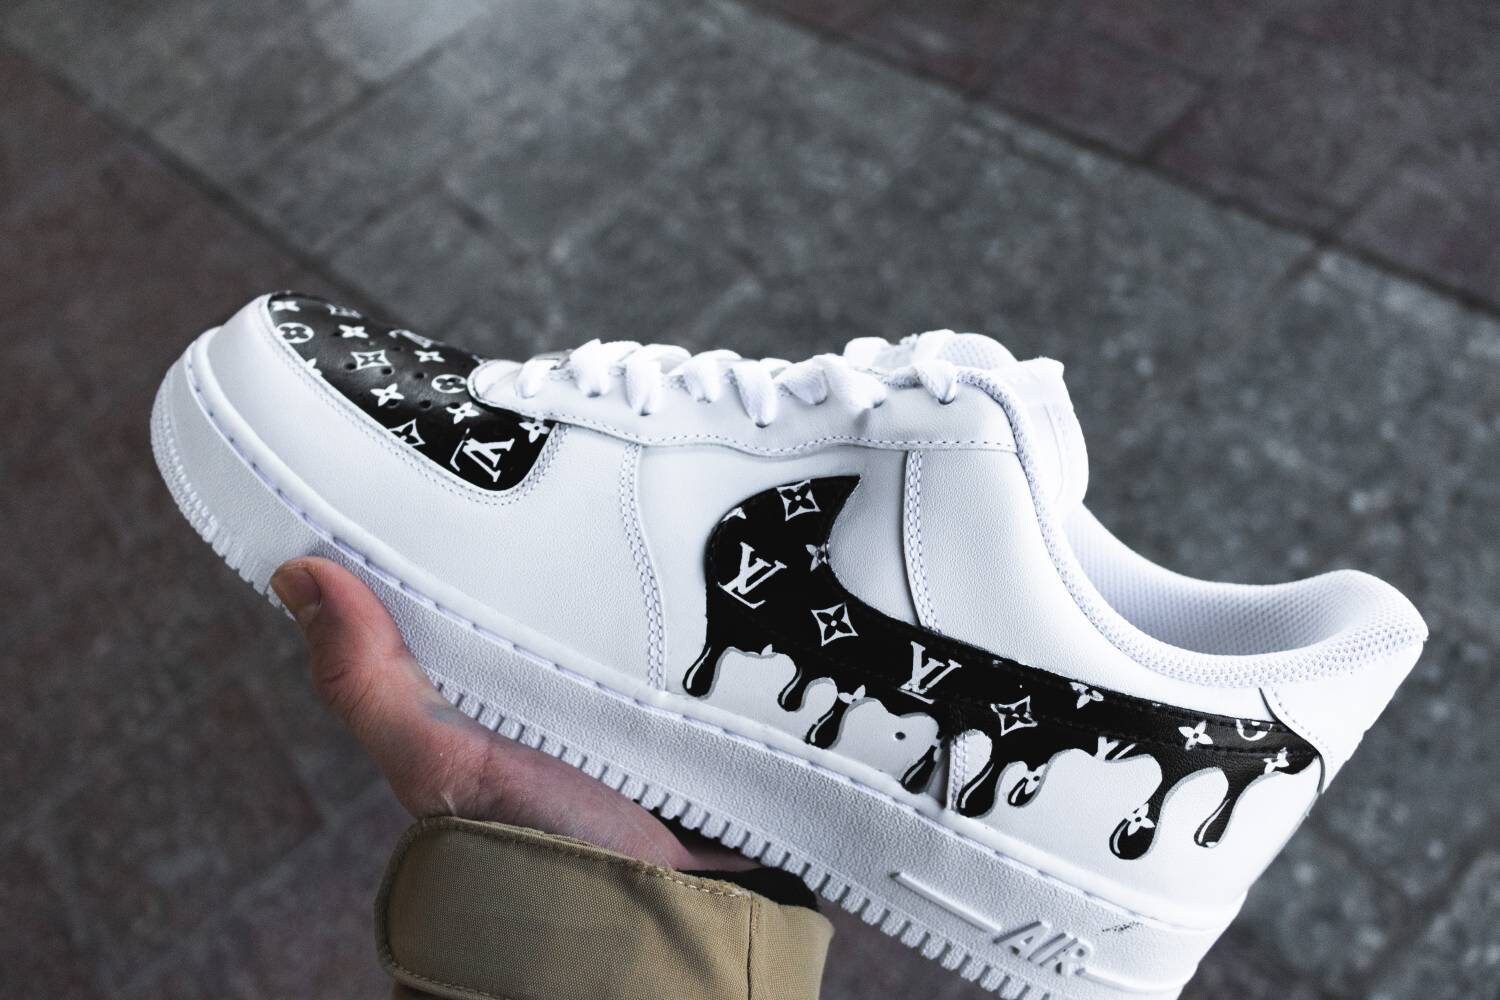 Nike air force 1 custom sneakers. These are custom hand | Etsy